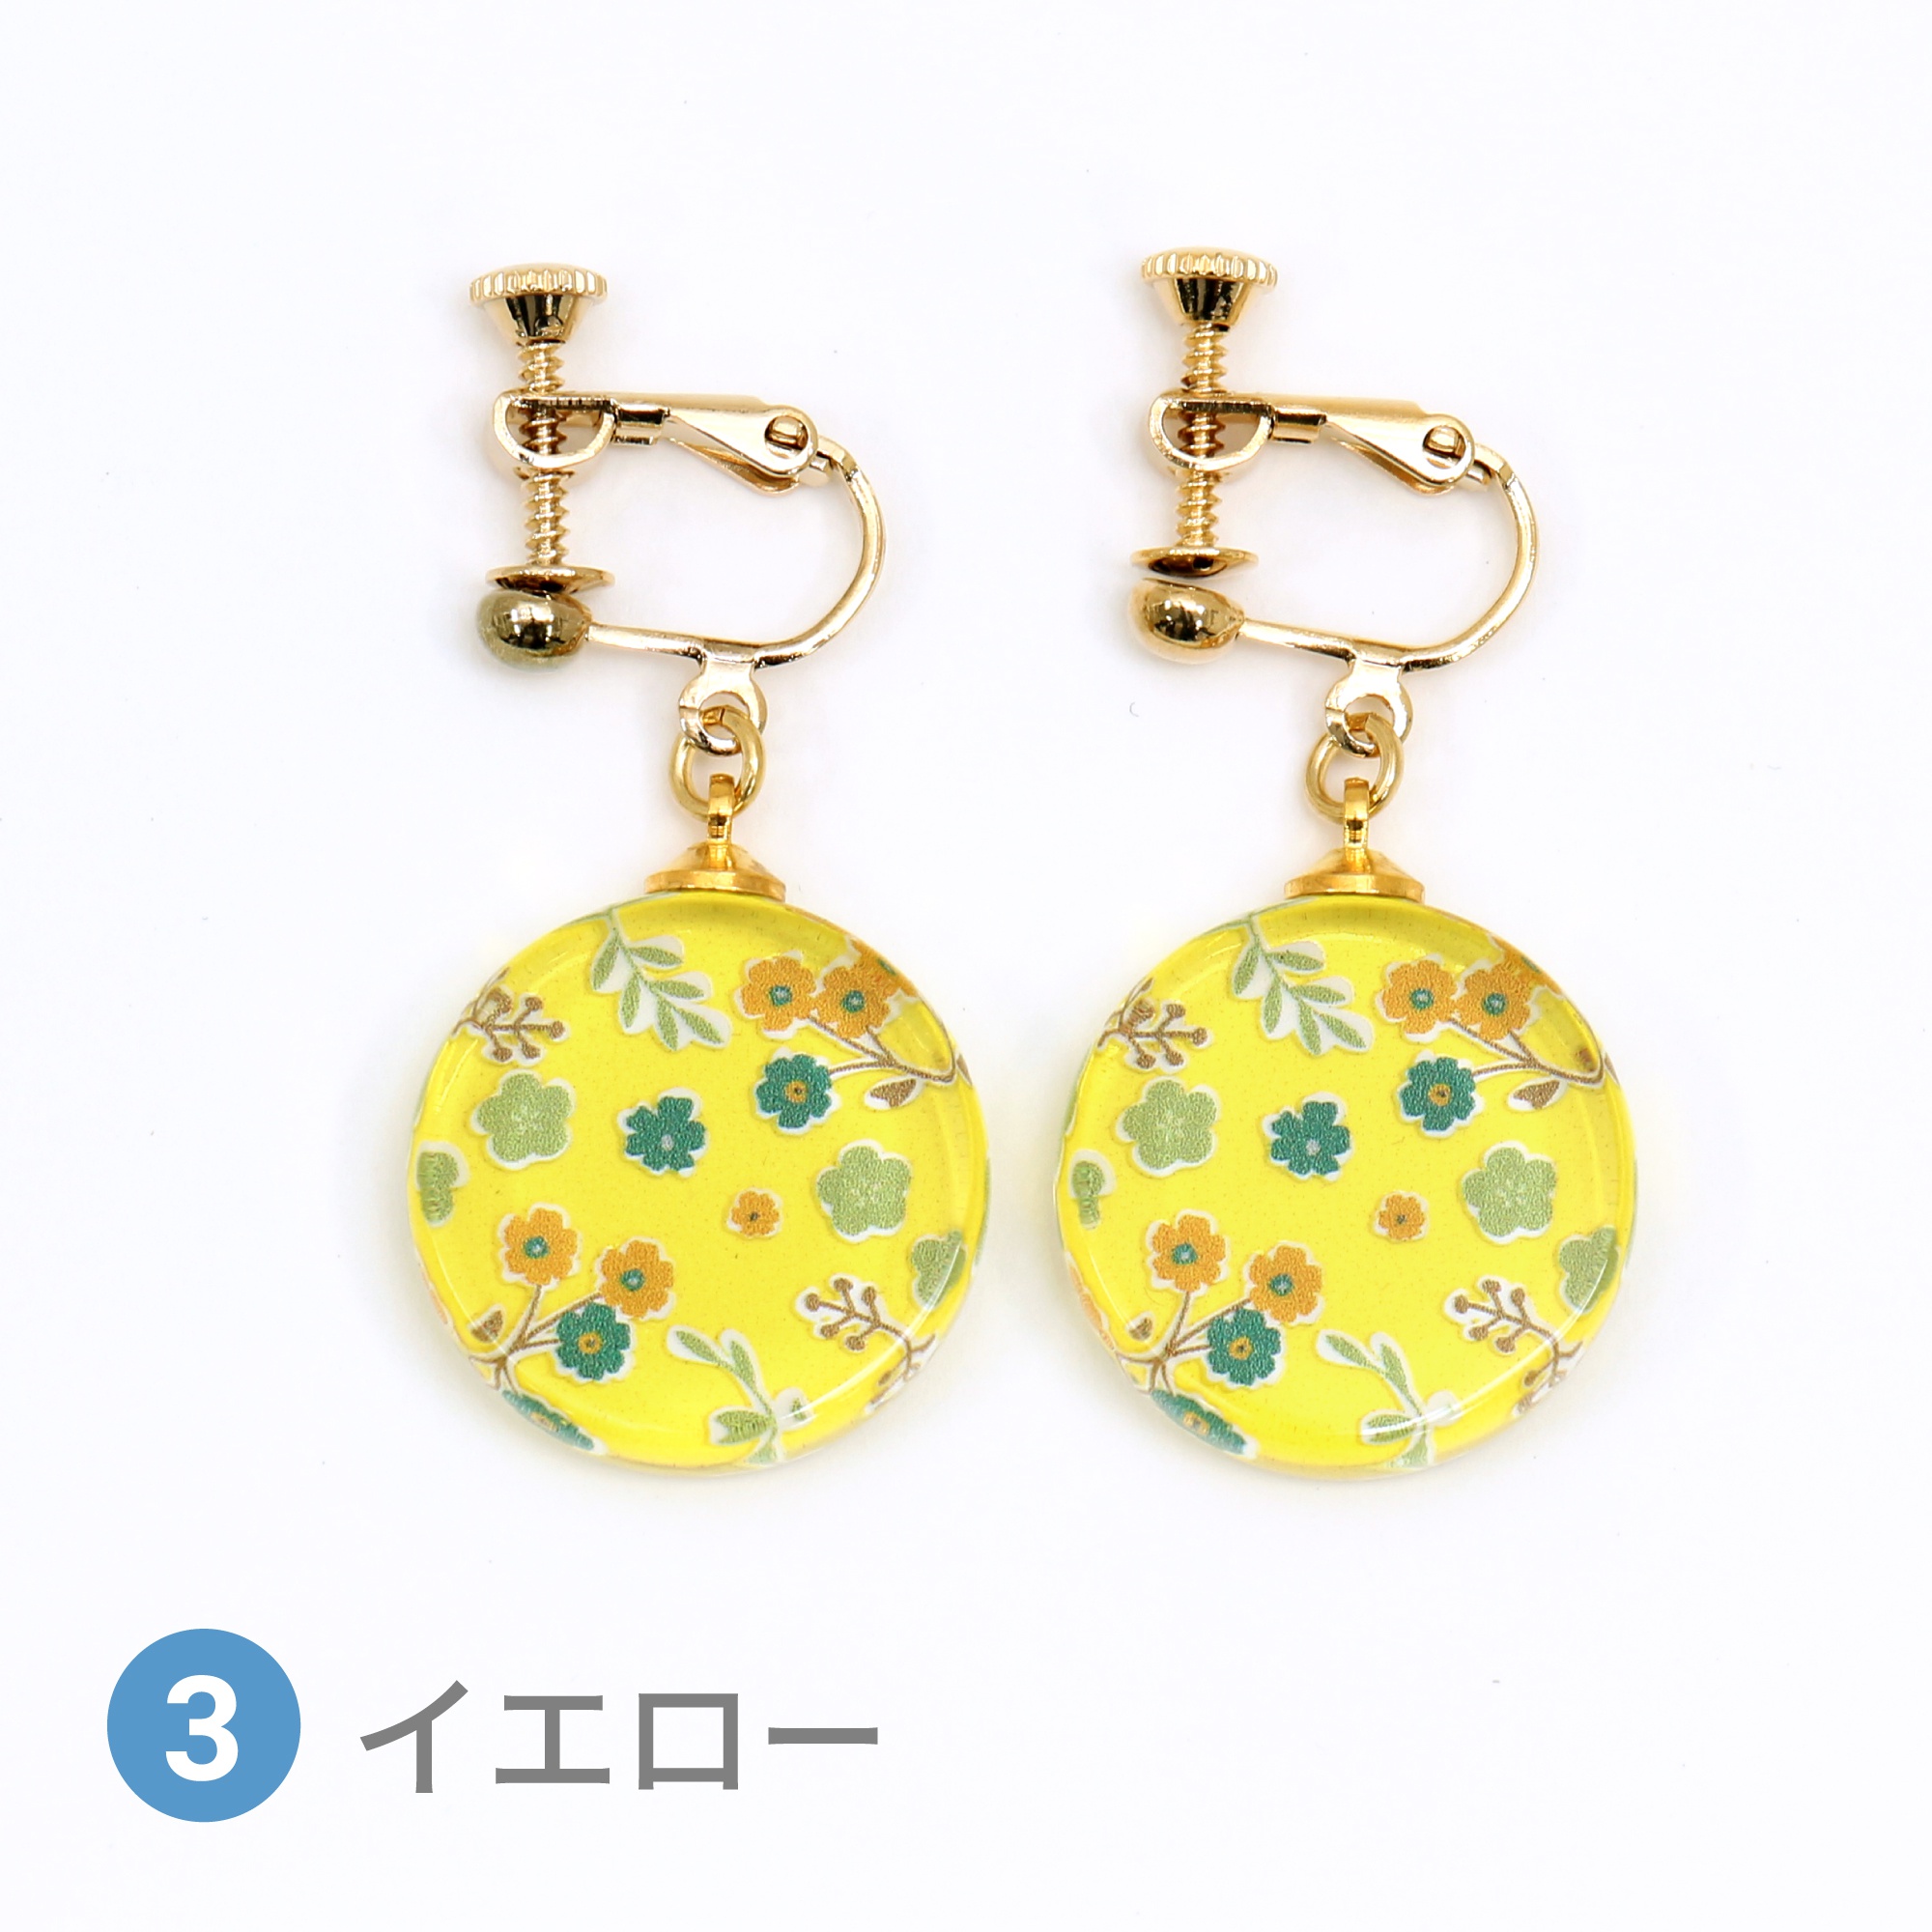 Glass accessories Earring FLORAL PATTERN yellow round shape